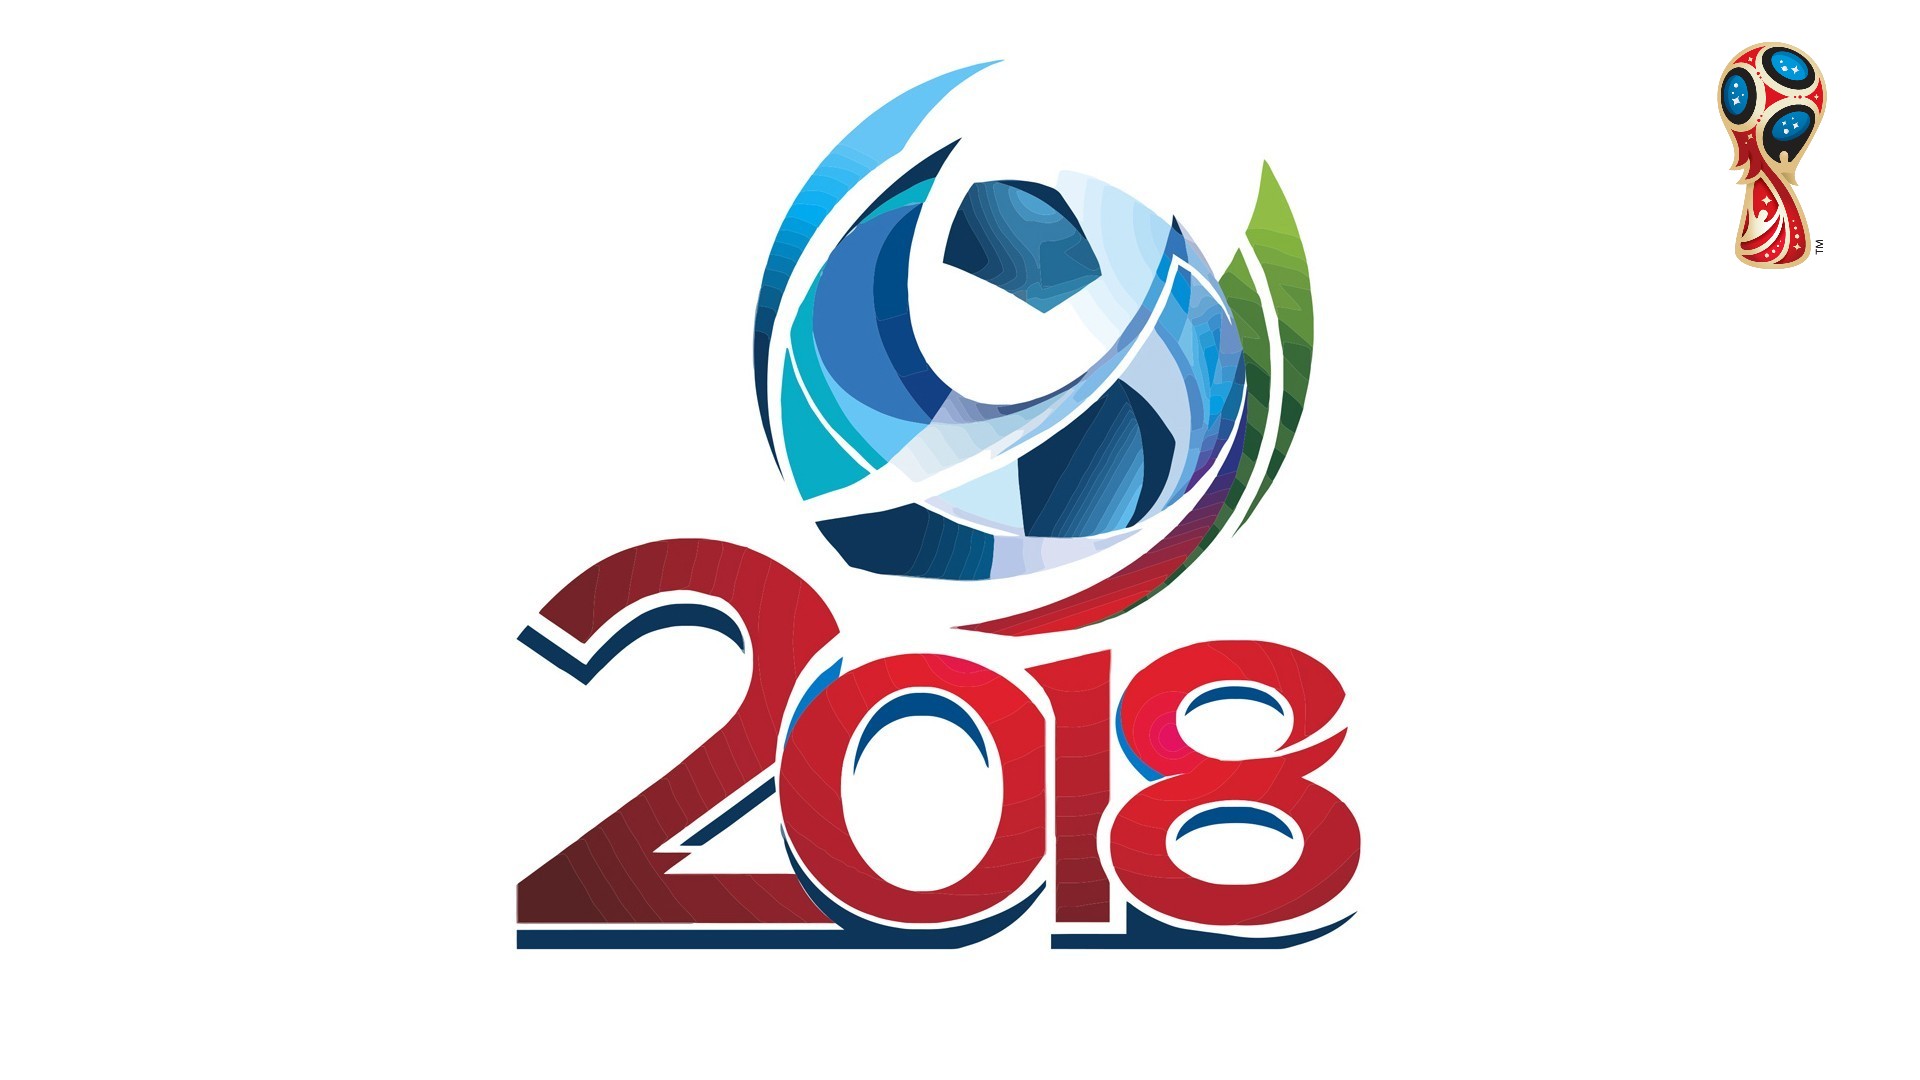 World Cup Russia Desktop Wallpapers with resolution 1920x1080 pixel. You can make this wallpaper for your Mac or Windows Desktop Background, iPhone, Android or Tablet and another Smartphone device